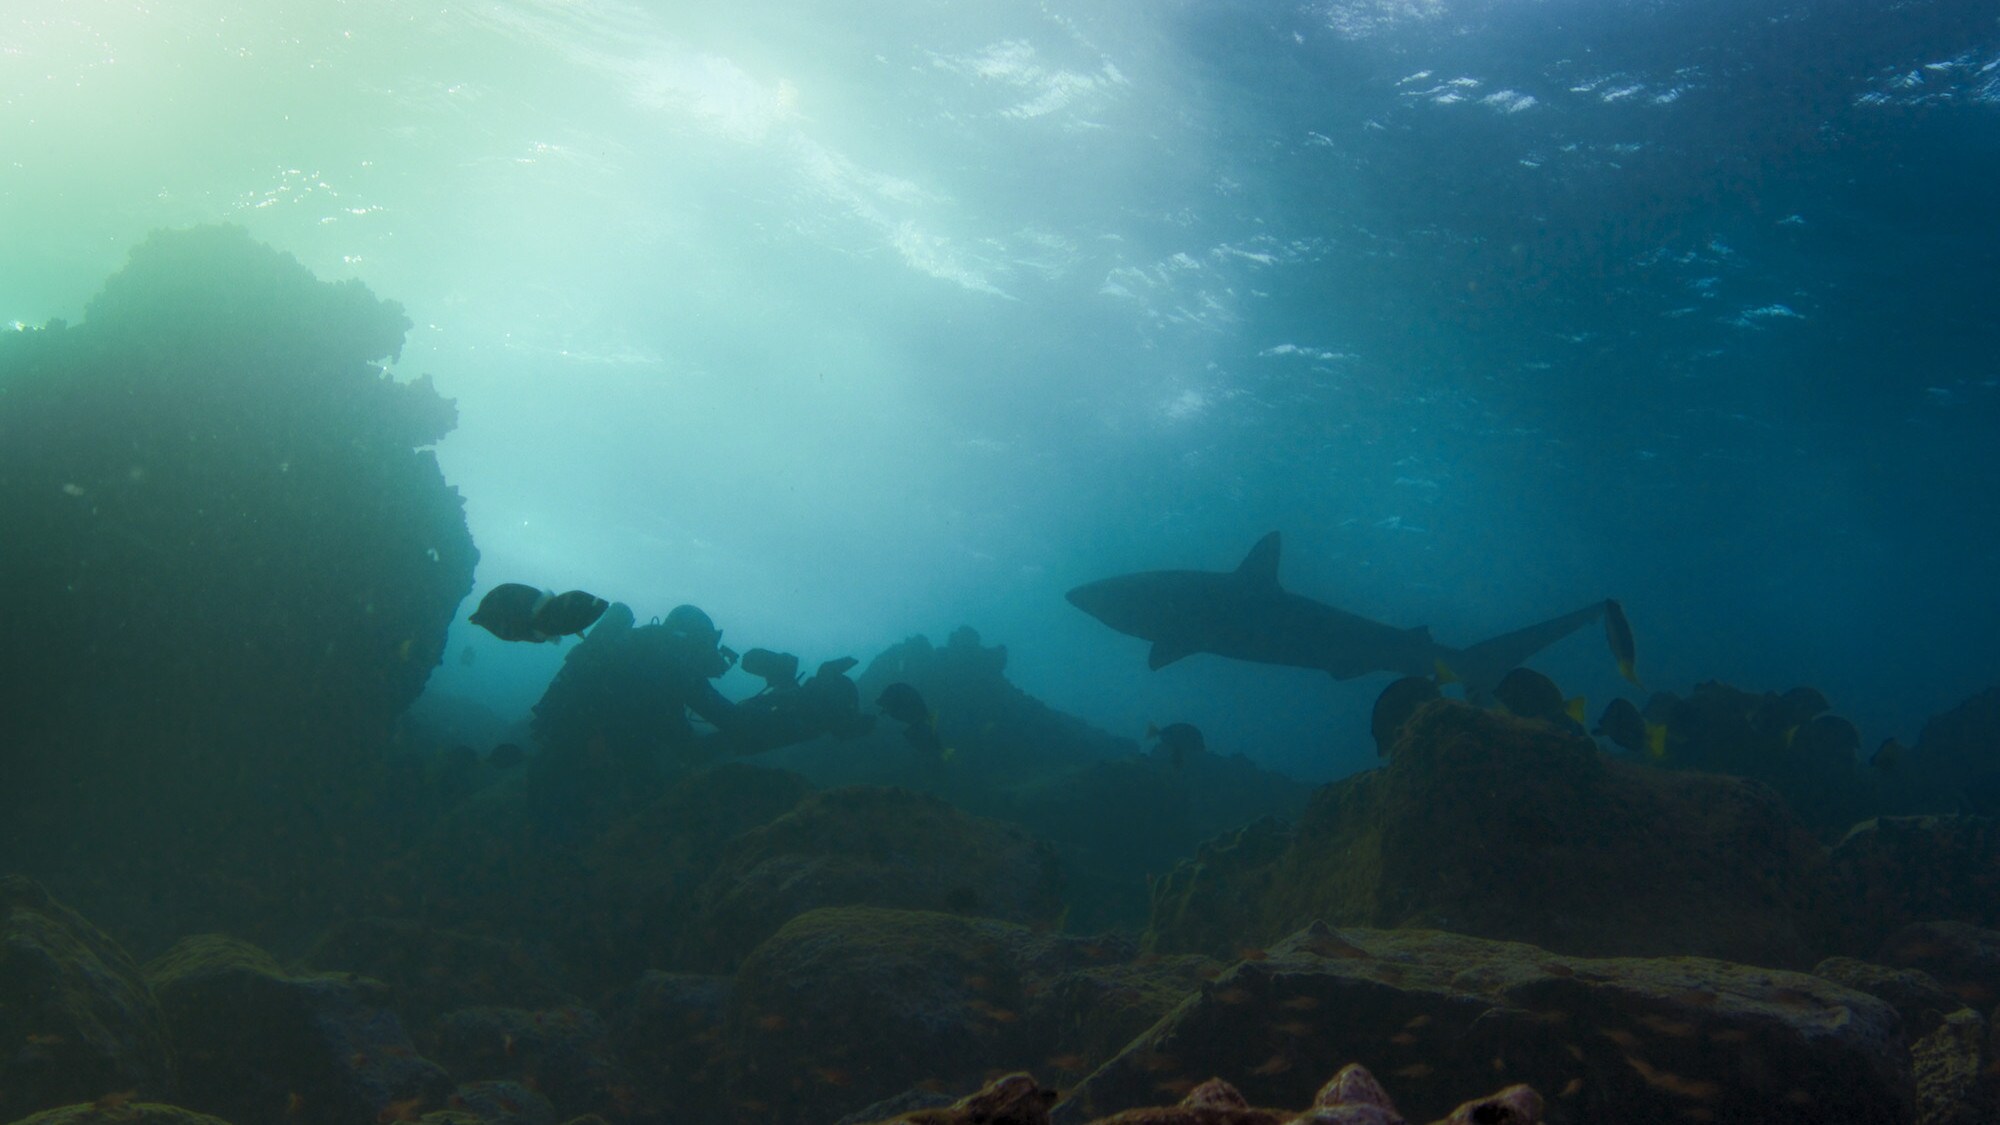 Underwater, murky shot of Jeff Hester amongst the rocks filming a Galapagos Shark. (National Geographic for Disney+/Bertie Gregory)